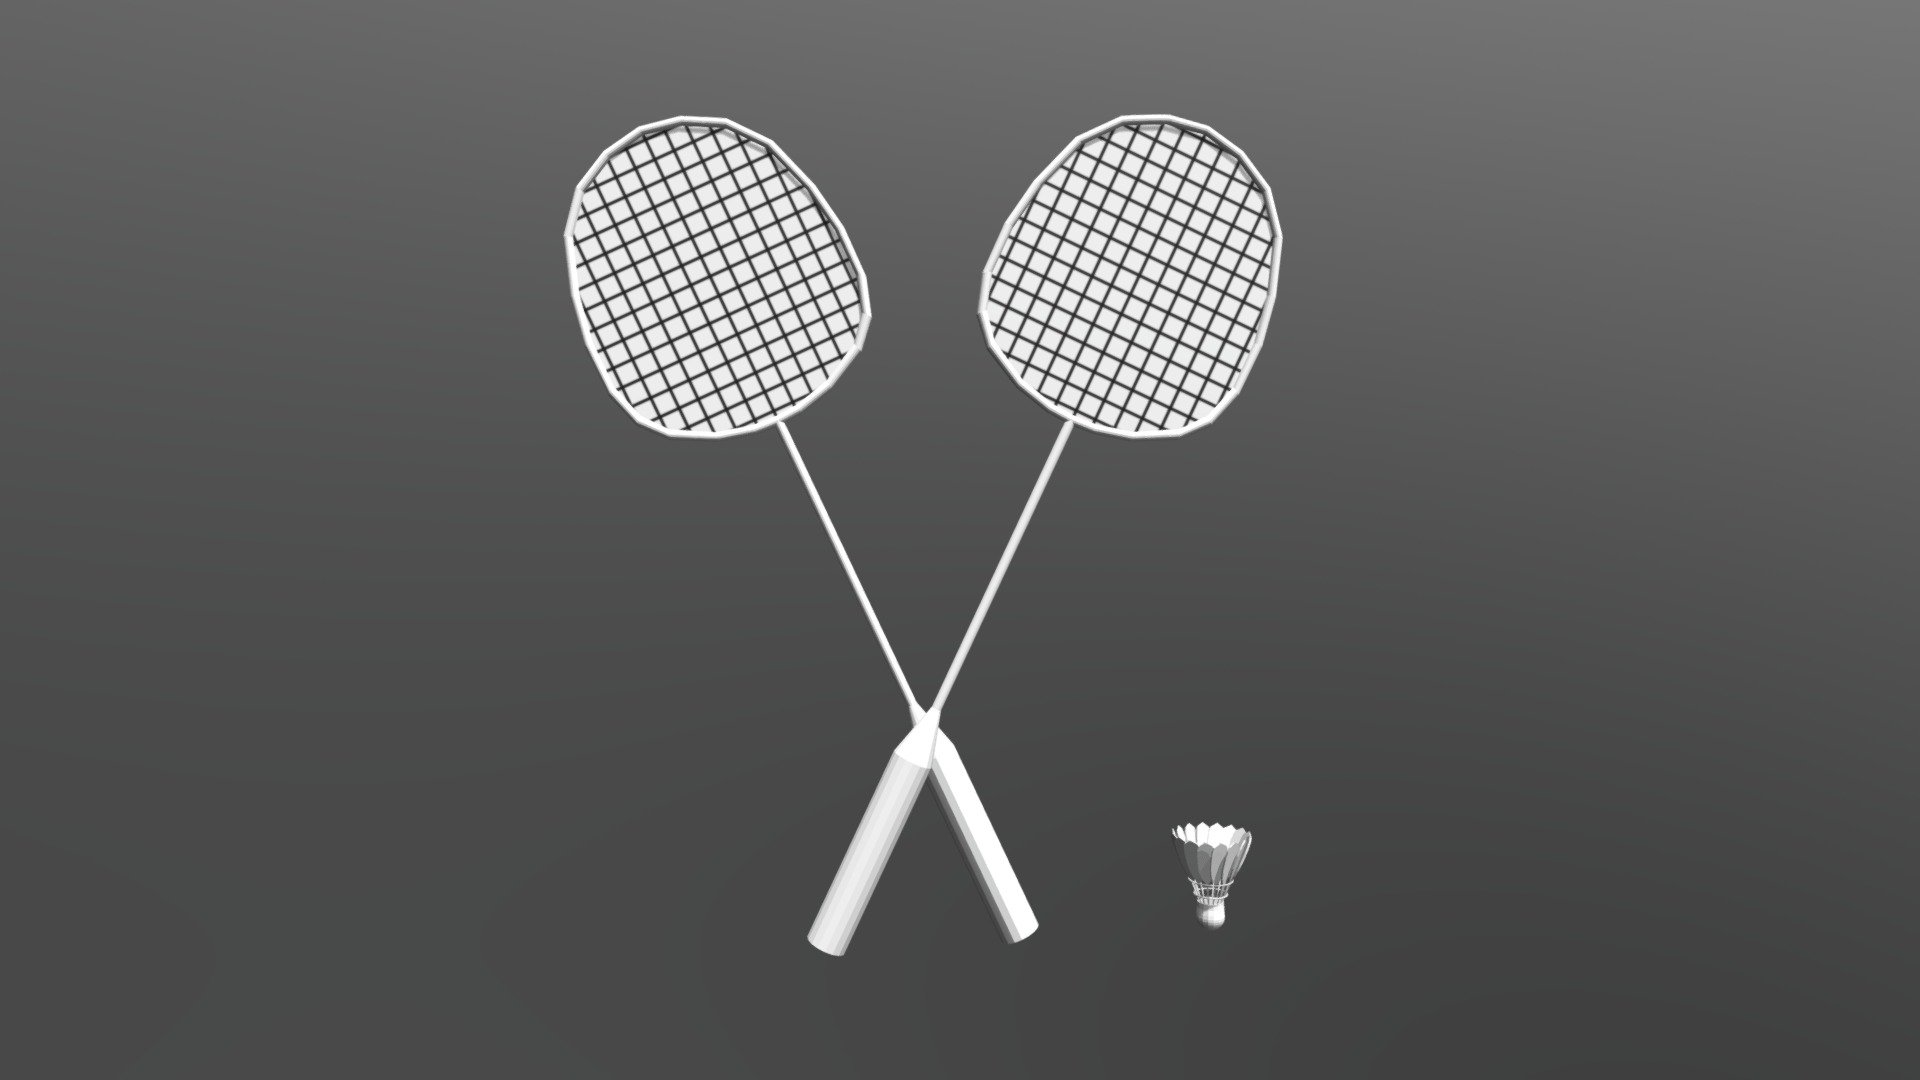 Badminton Racket And Shuttlecock (Low Poly) used for background materials in MANGA I made 3d model